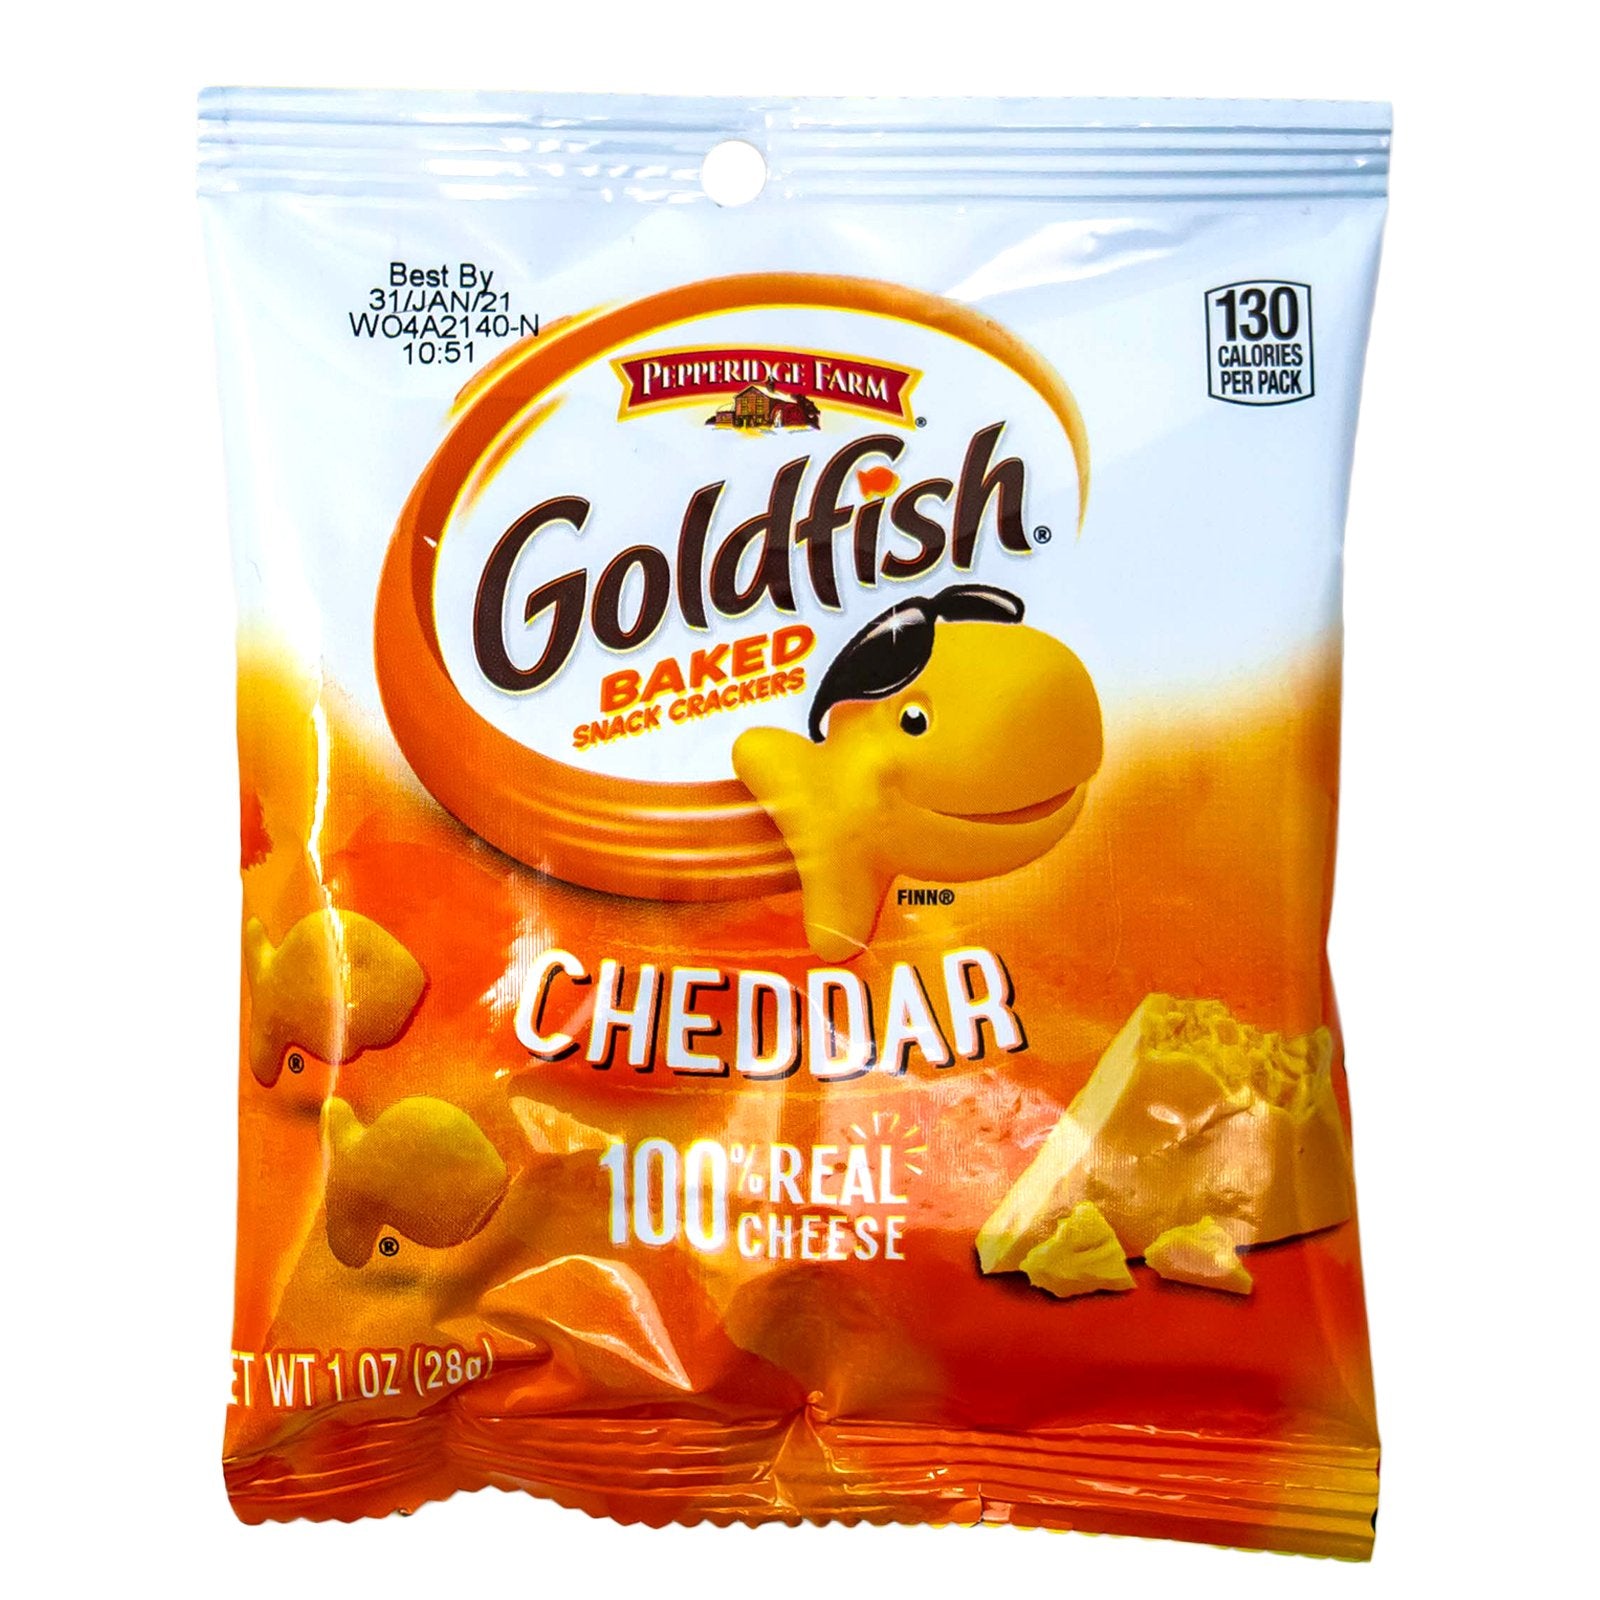 gold fish crackers